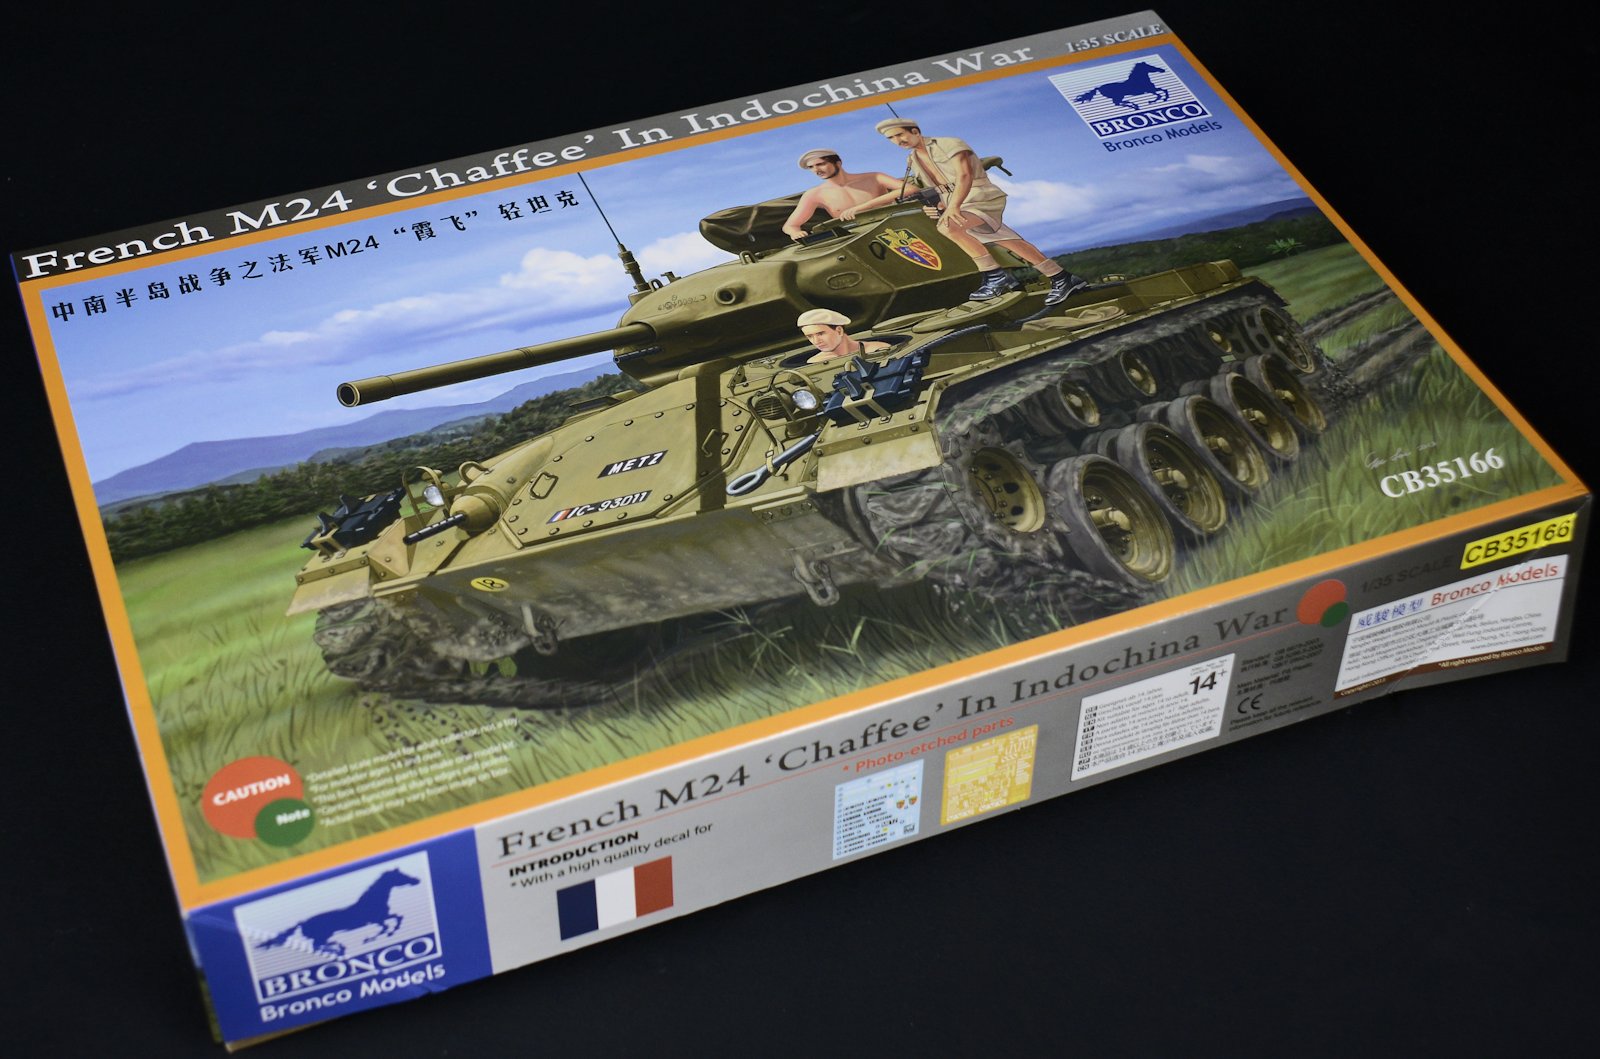 Bronco Models CB35166 French M24 Chaffee in Indochina War  in 1:35 